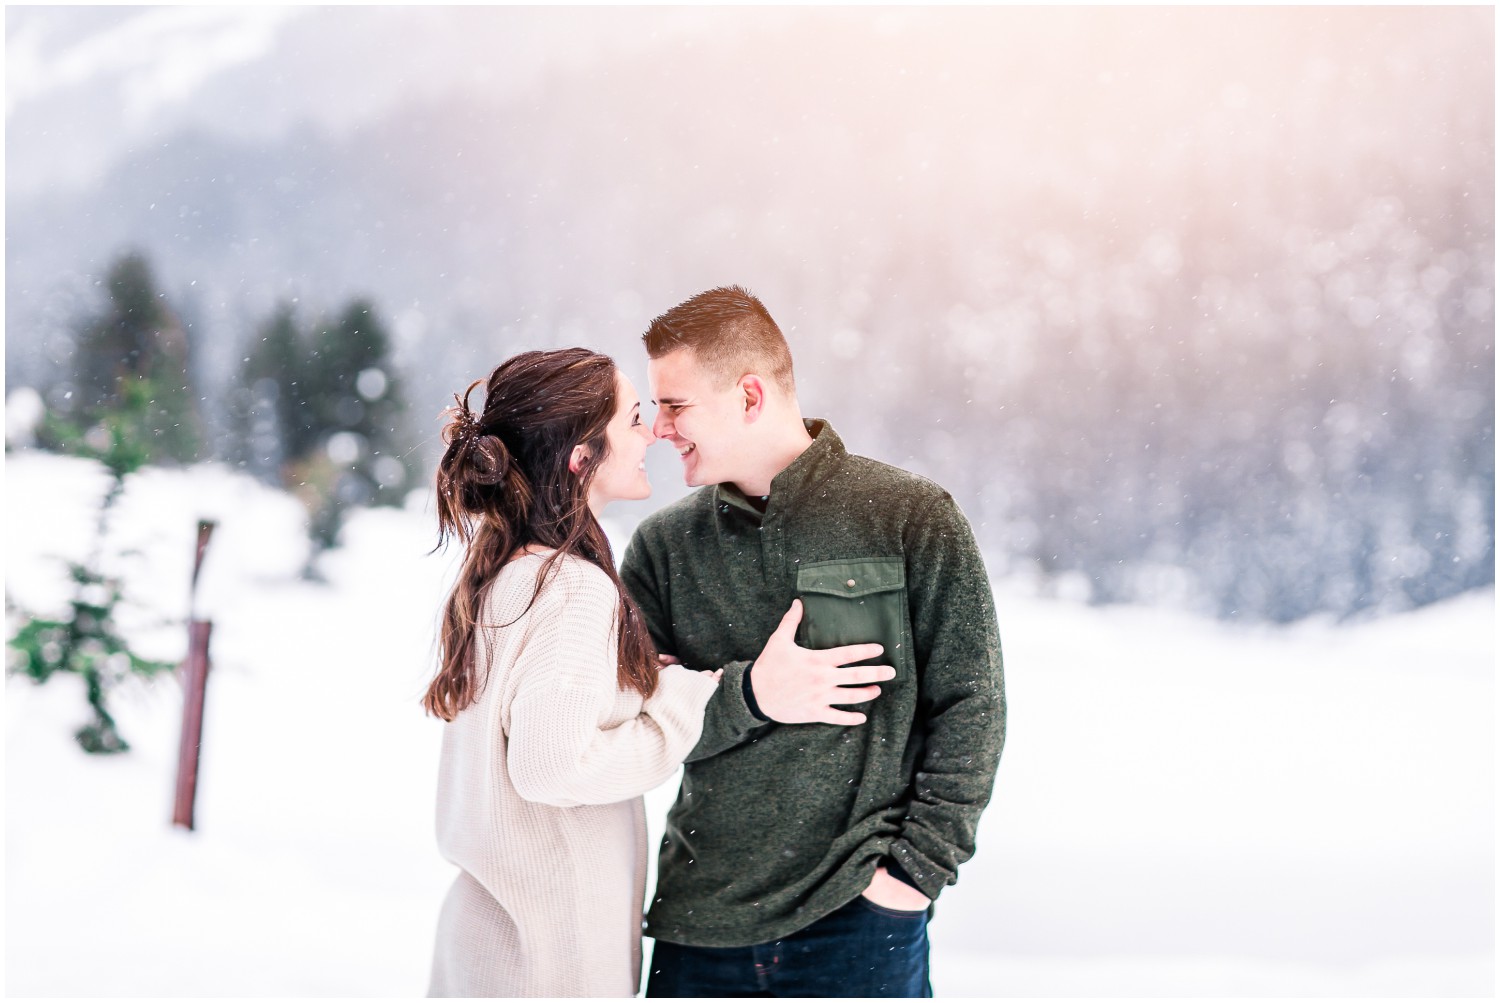 A Beautiful Snowy Engagement Session at Gold Creek Pond